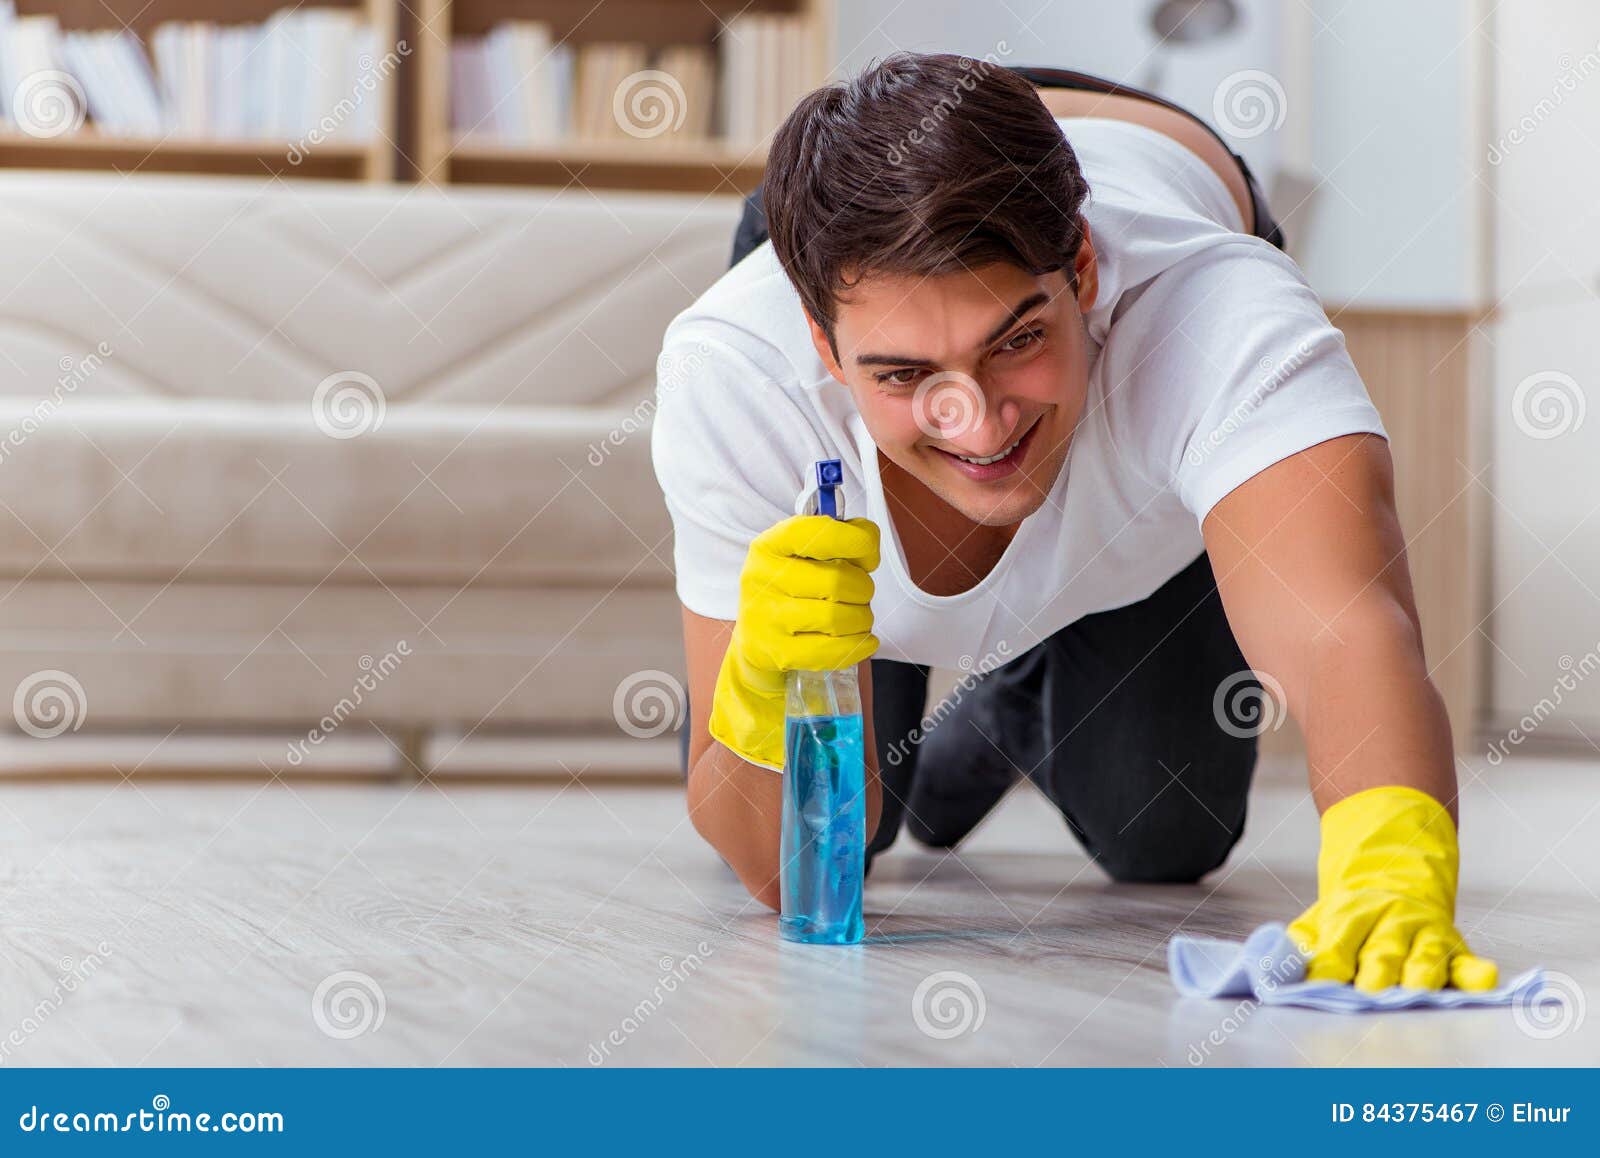 The Man Husband Cleaning The House Helping Wife Stock Image